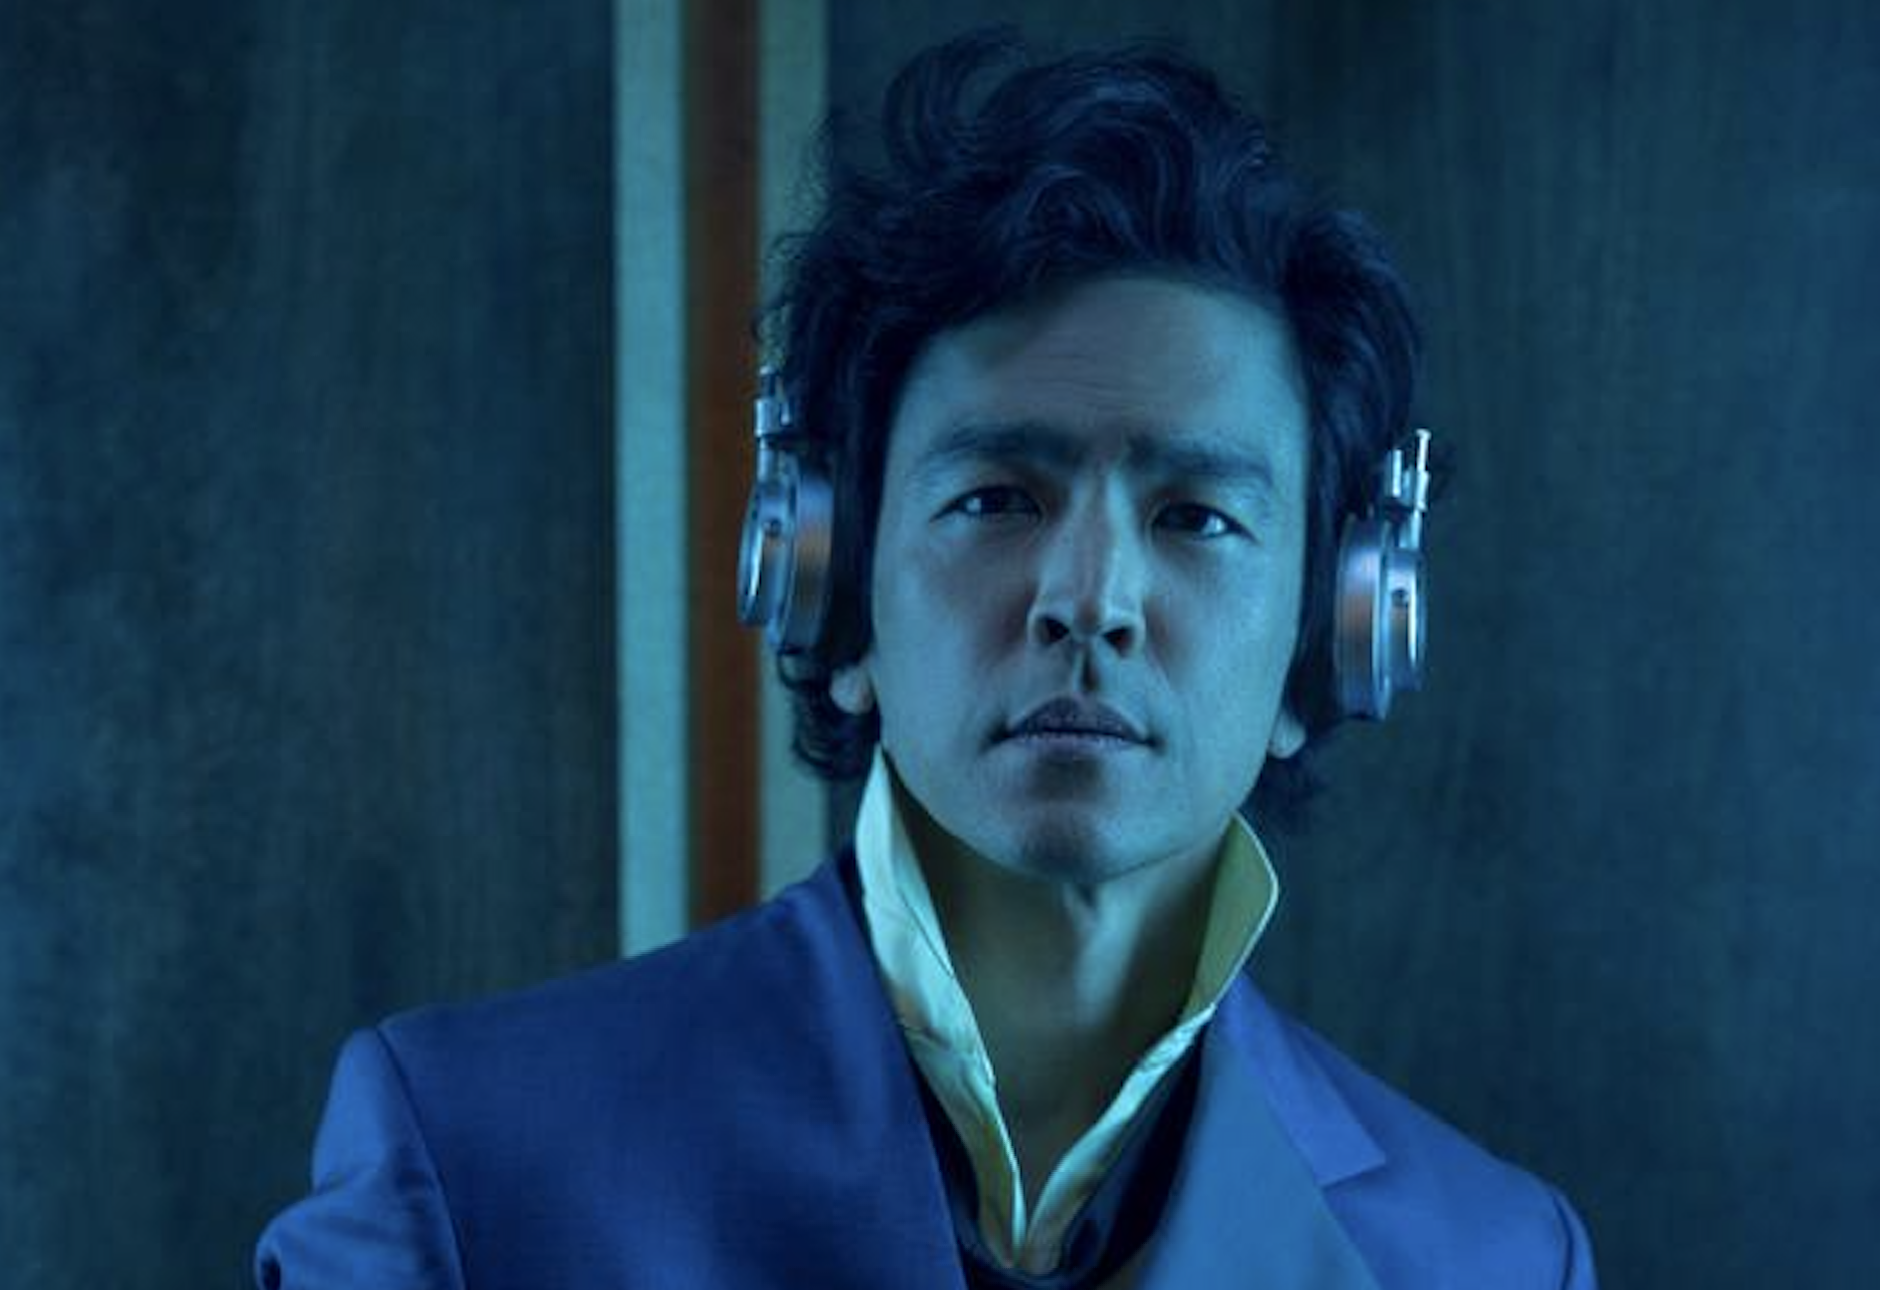 John Cho as Spike Spiegel in the 2021 Netflix Cowboy Bebop adaptation. He's wearing Spike's iconic blue suit with a yellow collared shirt. He also has a pair of grey headphones on. The picture has a blue filter.